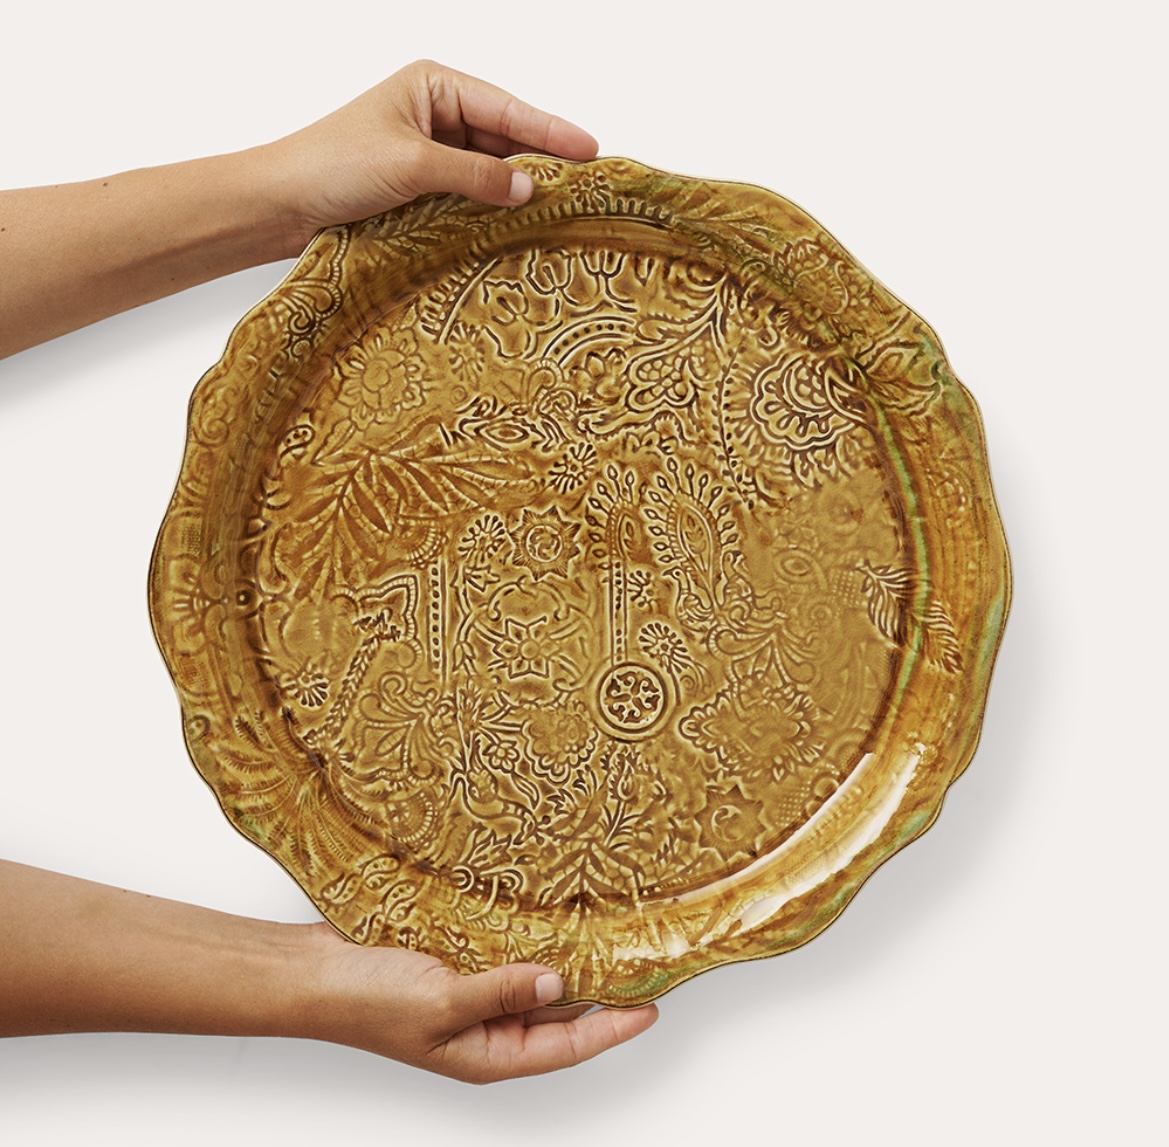 ROUND SERVING PLATE/PIZZA PLATE, PINEAPPLE